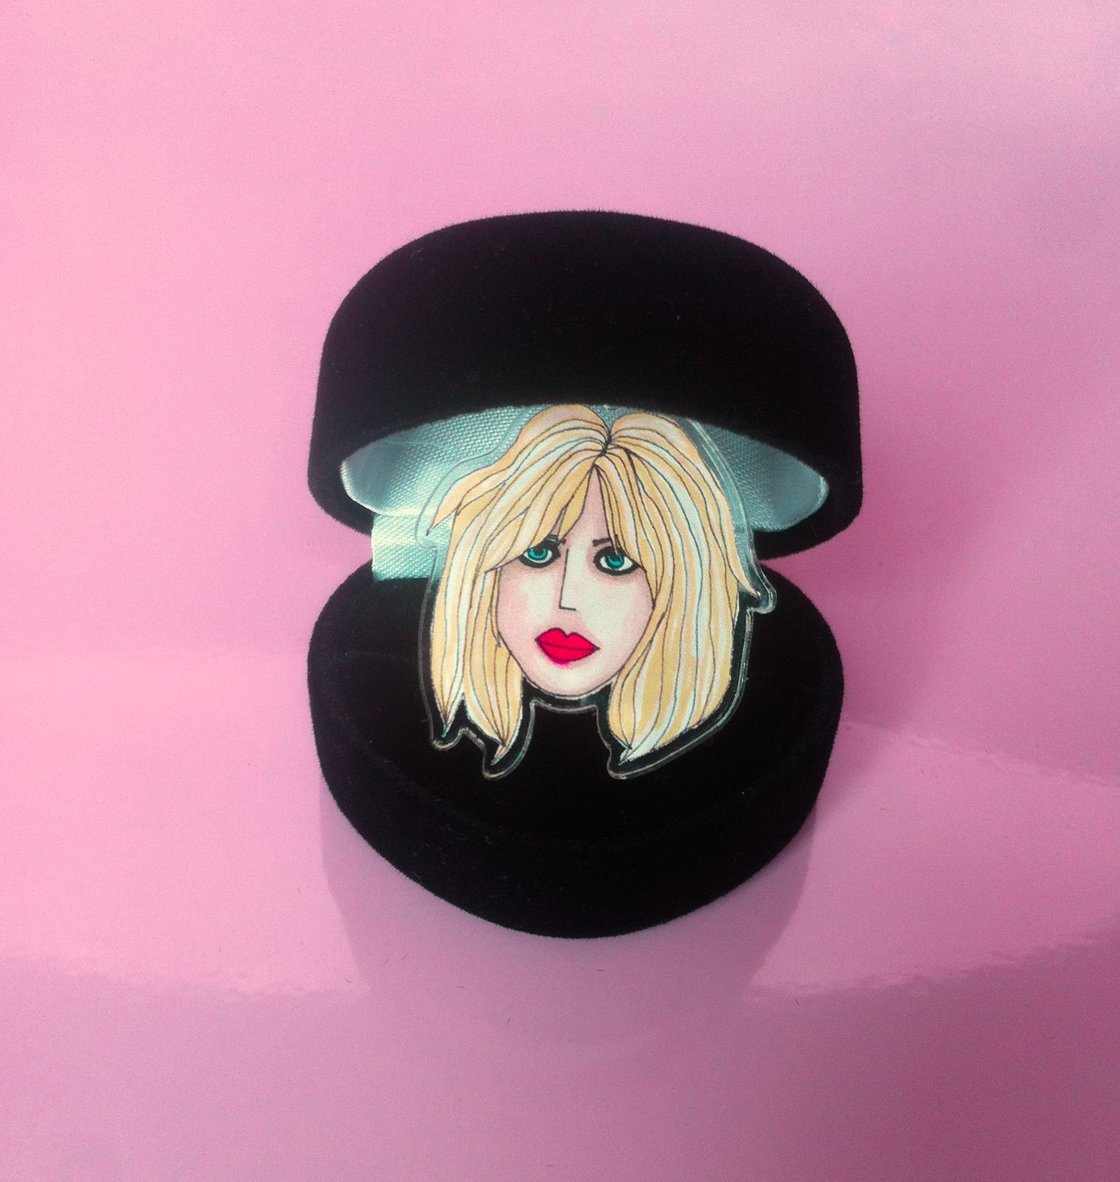 Image of Courtney Love acrylic plastic adjustable ring sold in black heart shaped box.